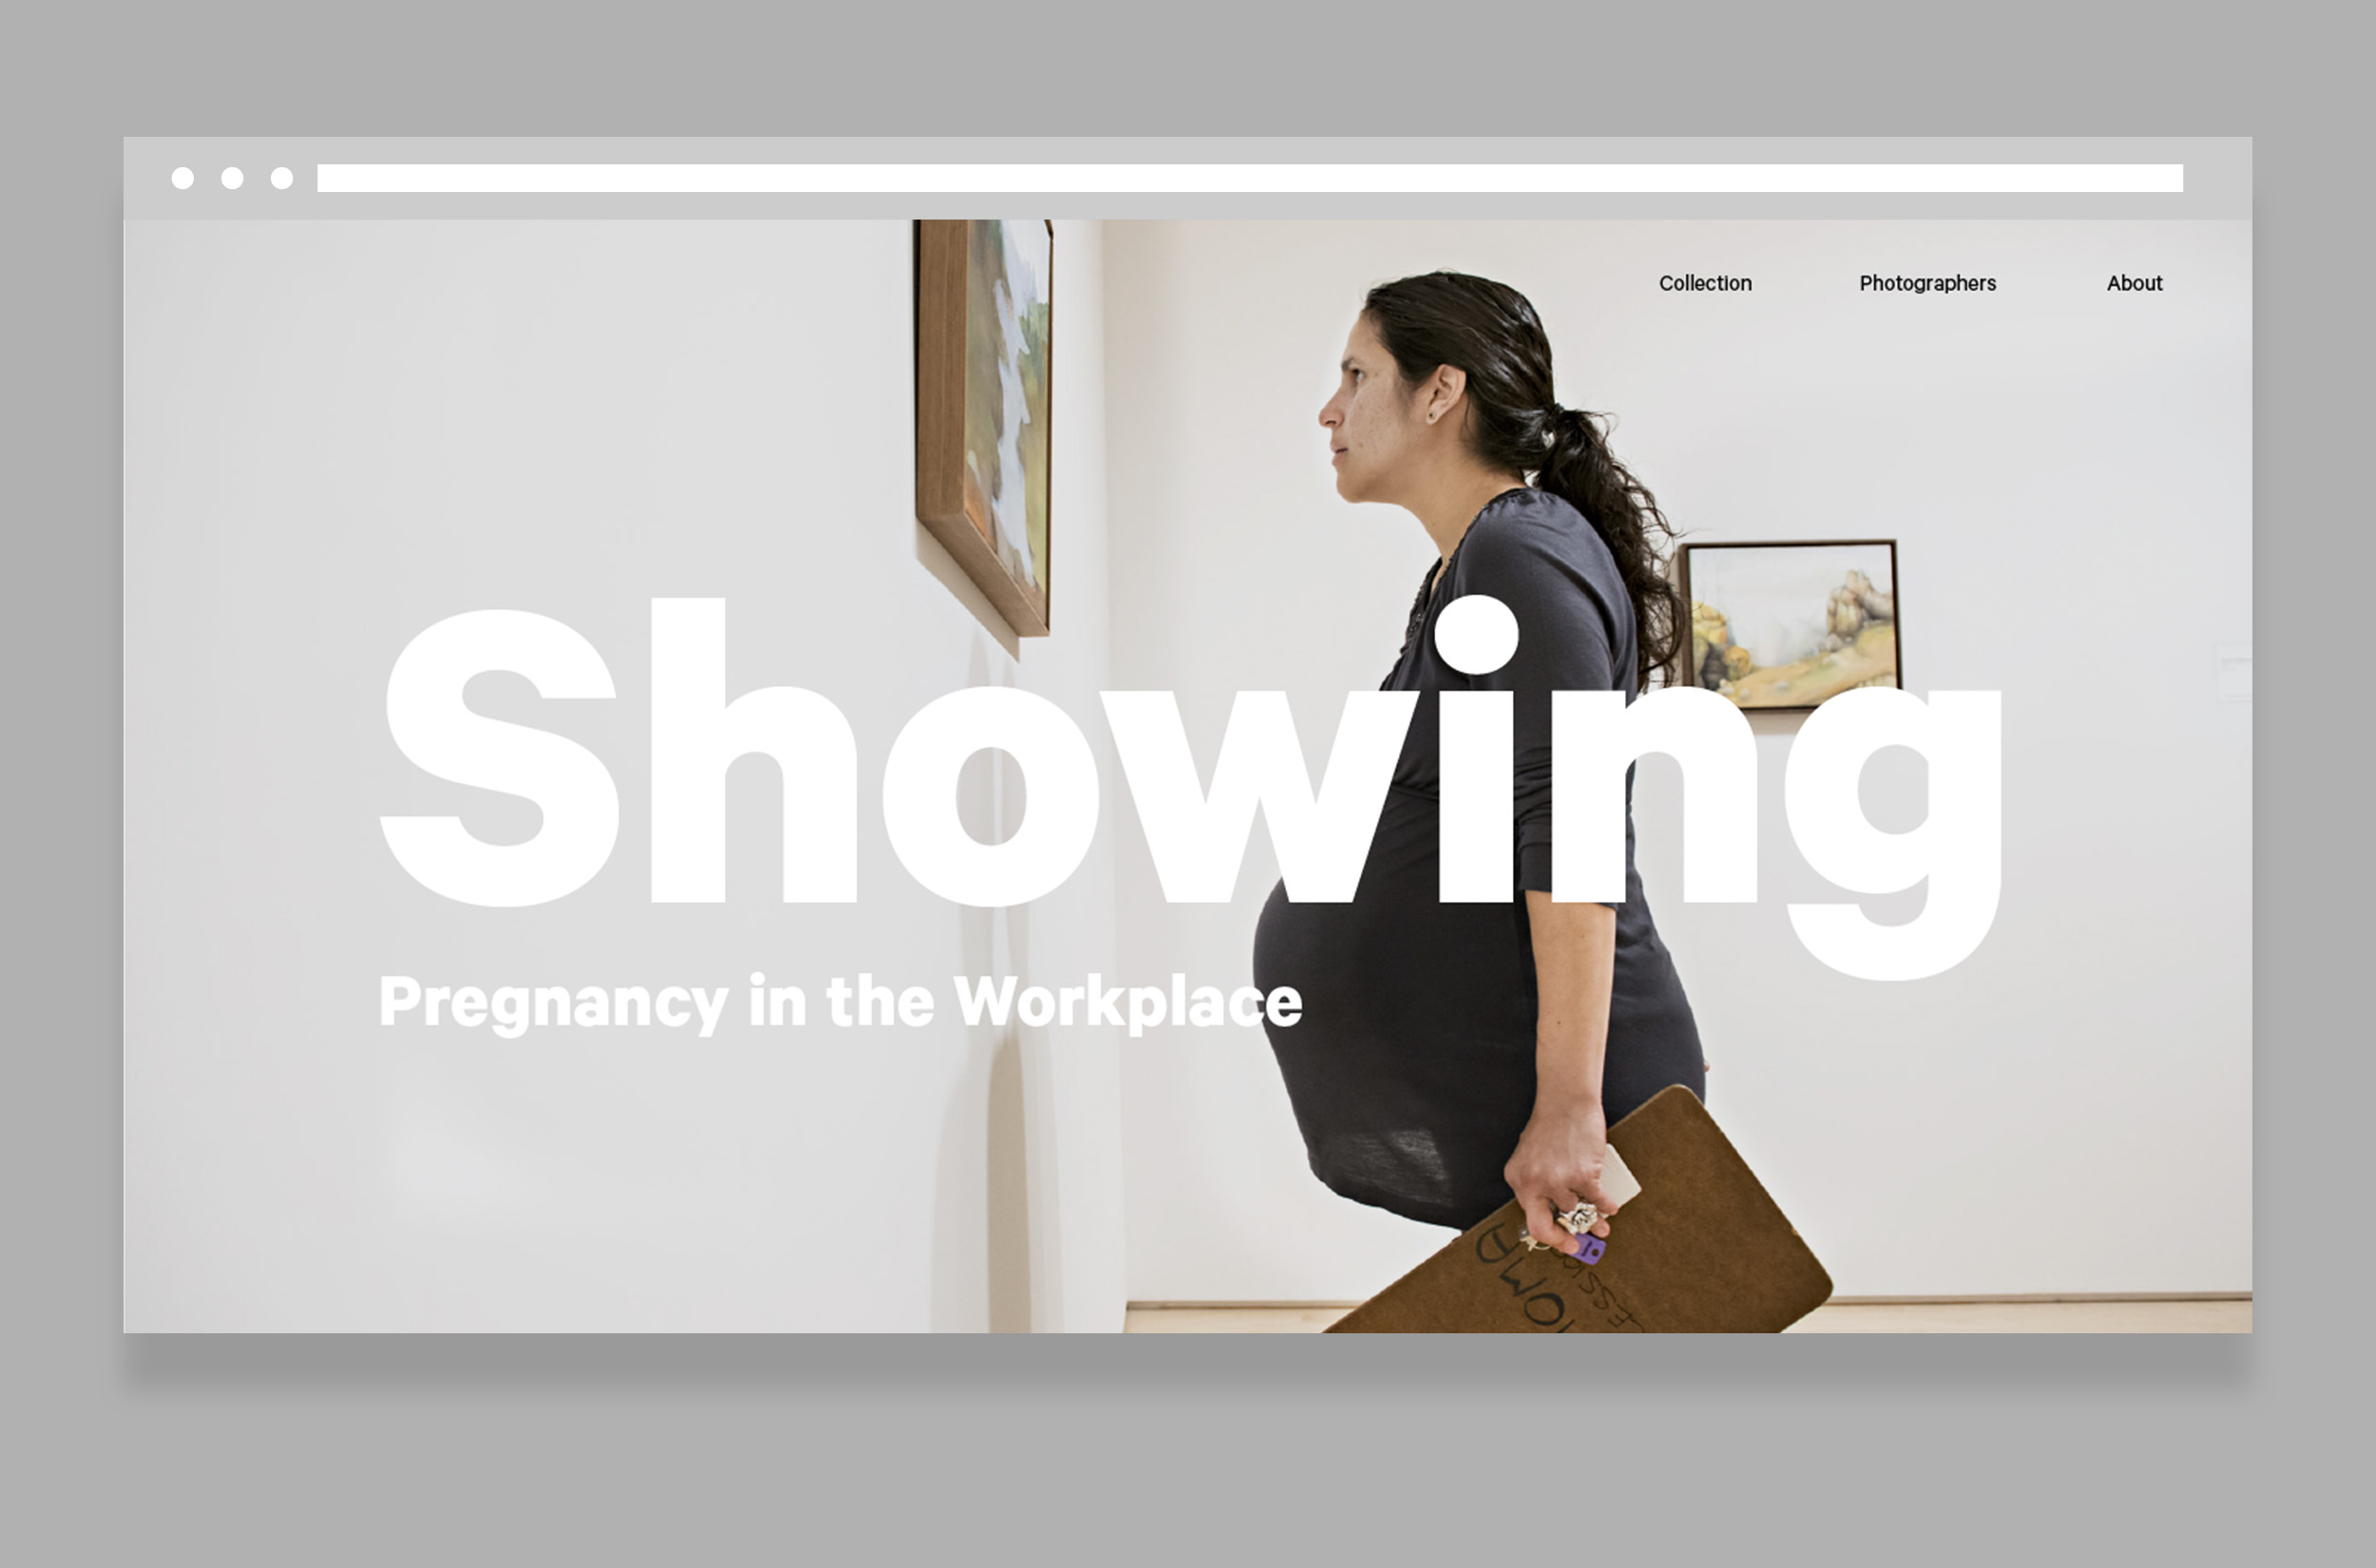 Image depicts a mock-up of a webpage with a pregnant person working in an art gallery. The image is overlaid with the title 